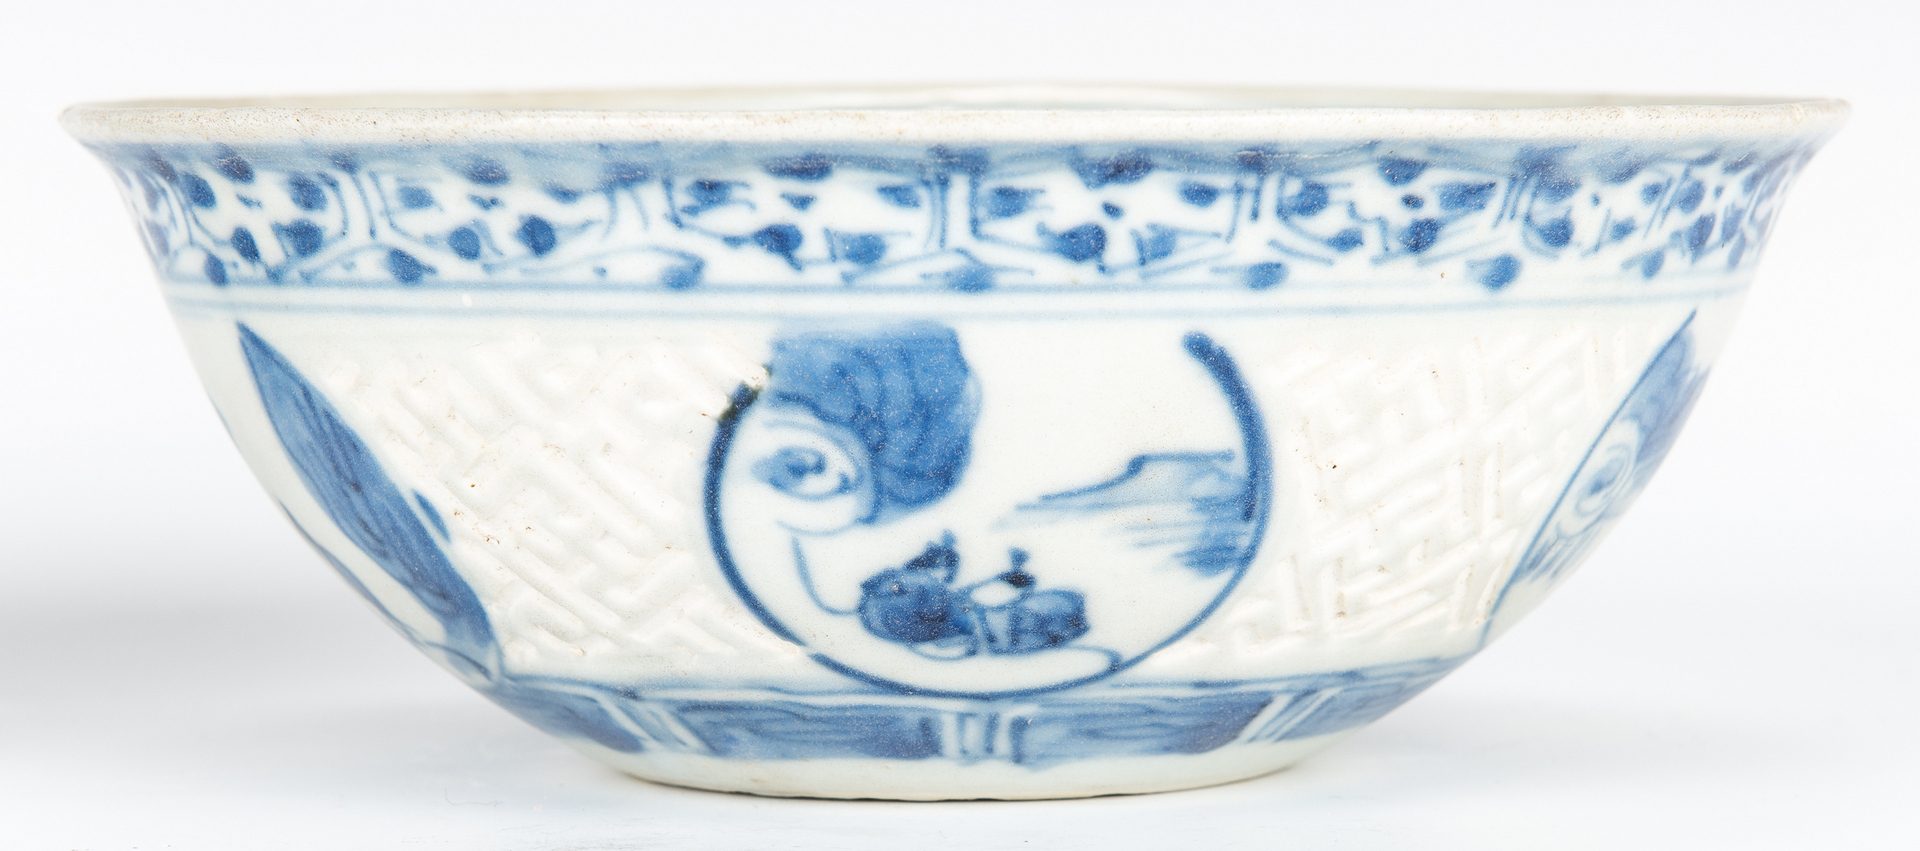 Lot 20: 2 Chinese "Hatcher Cargo" Shipwreck Porcelain Items